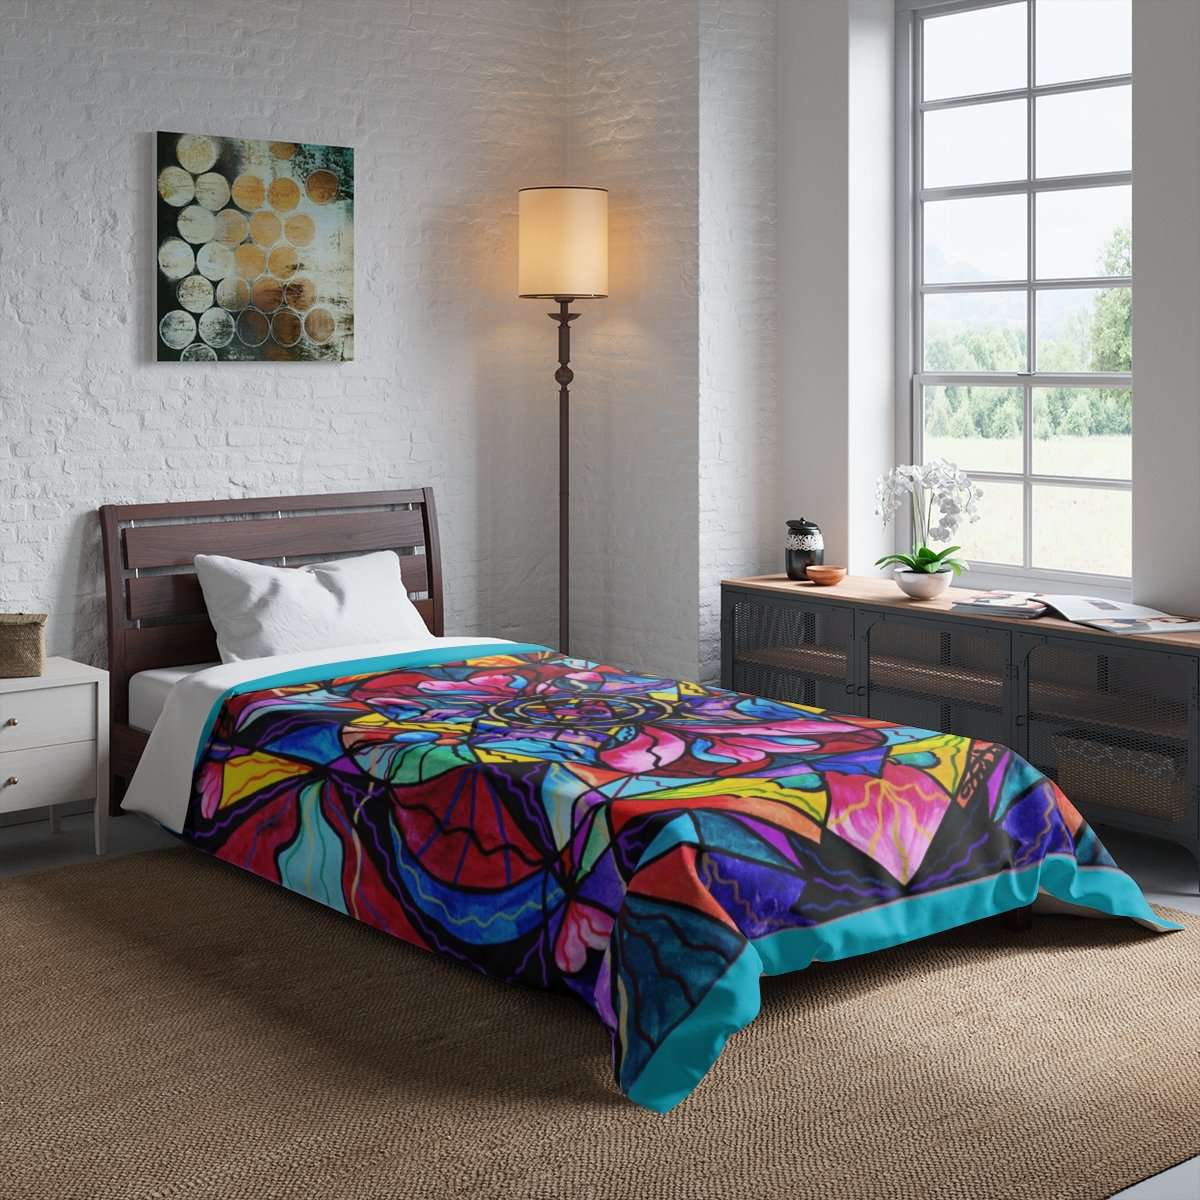 we-offer-the-best-prices-on-the-best-of-blue-ray-self-love-grid-comforter-discount_3.jpg